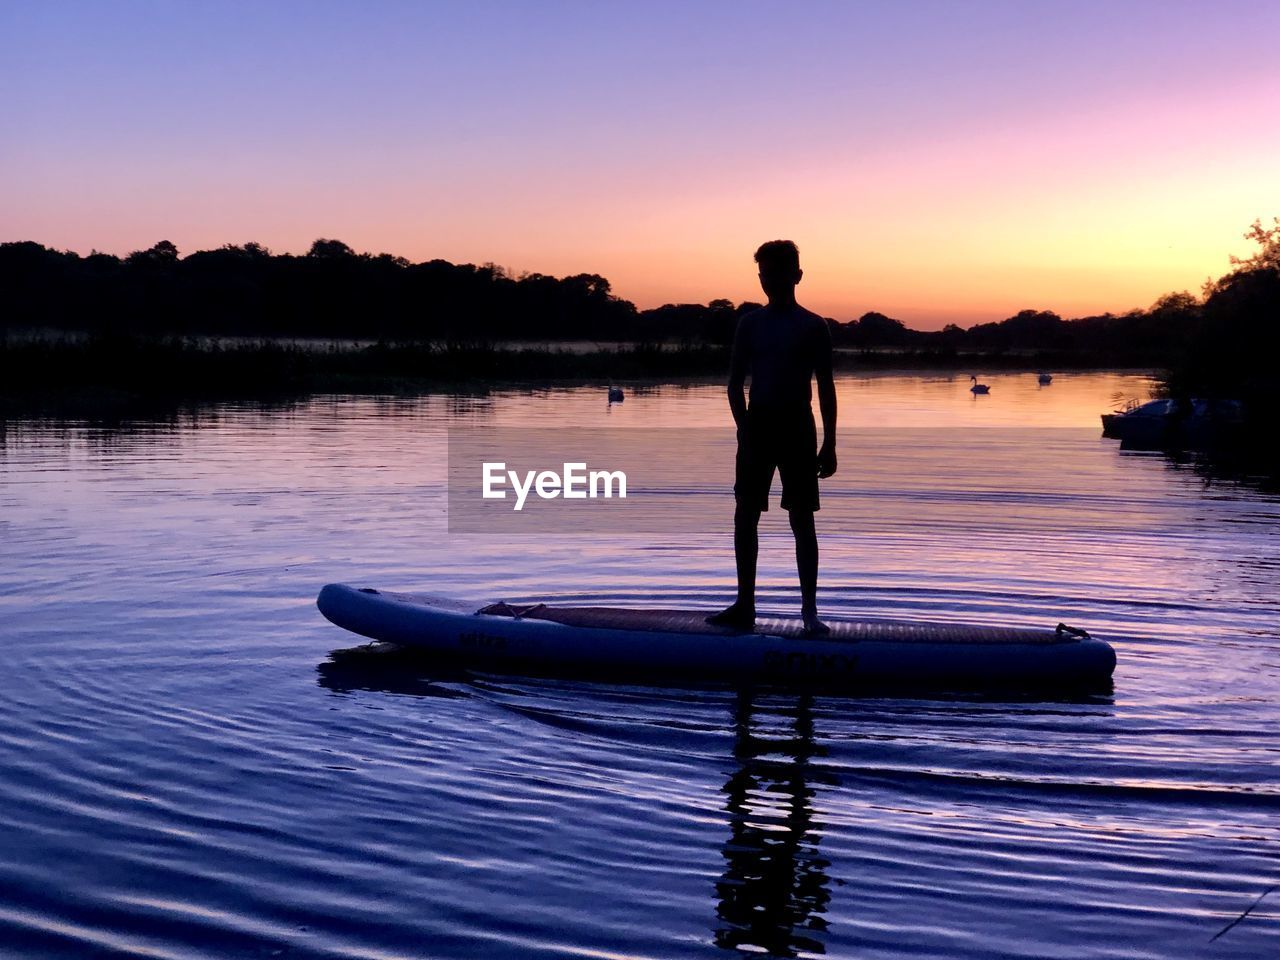 Boy standing over boat on lake against sky during sunset